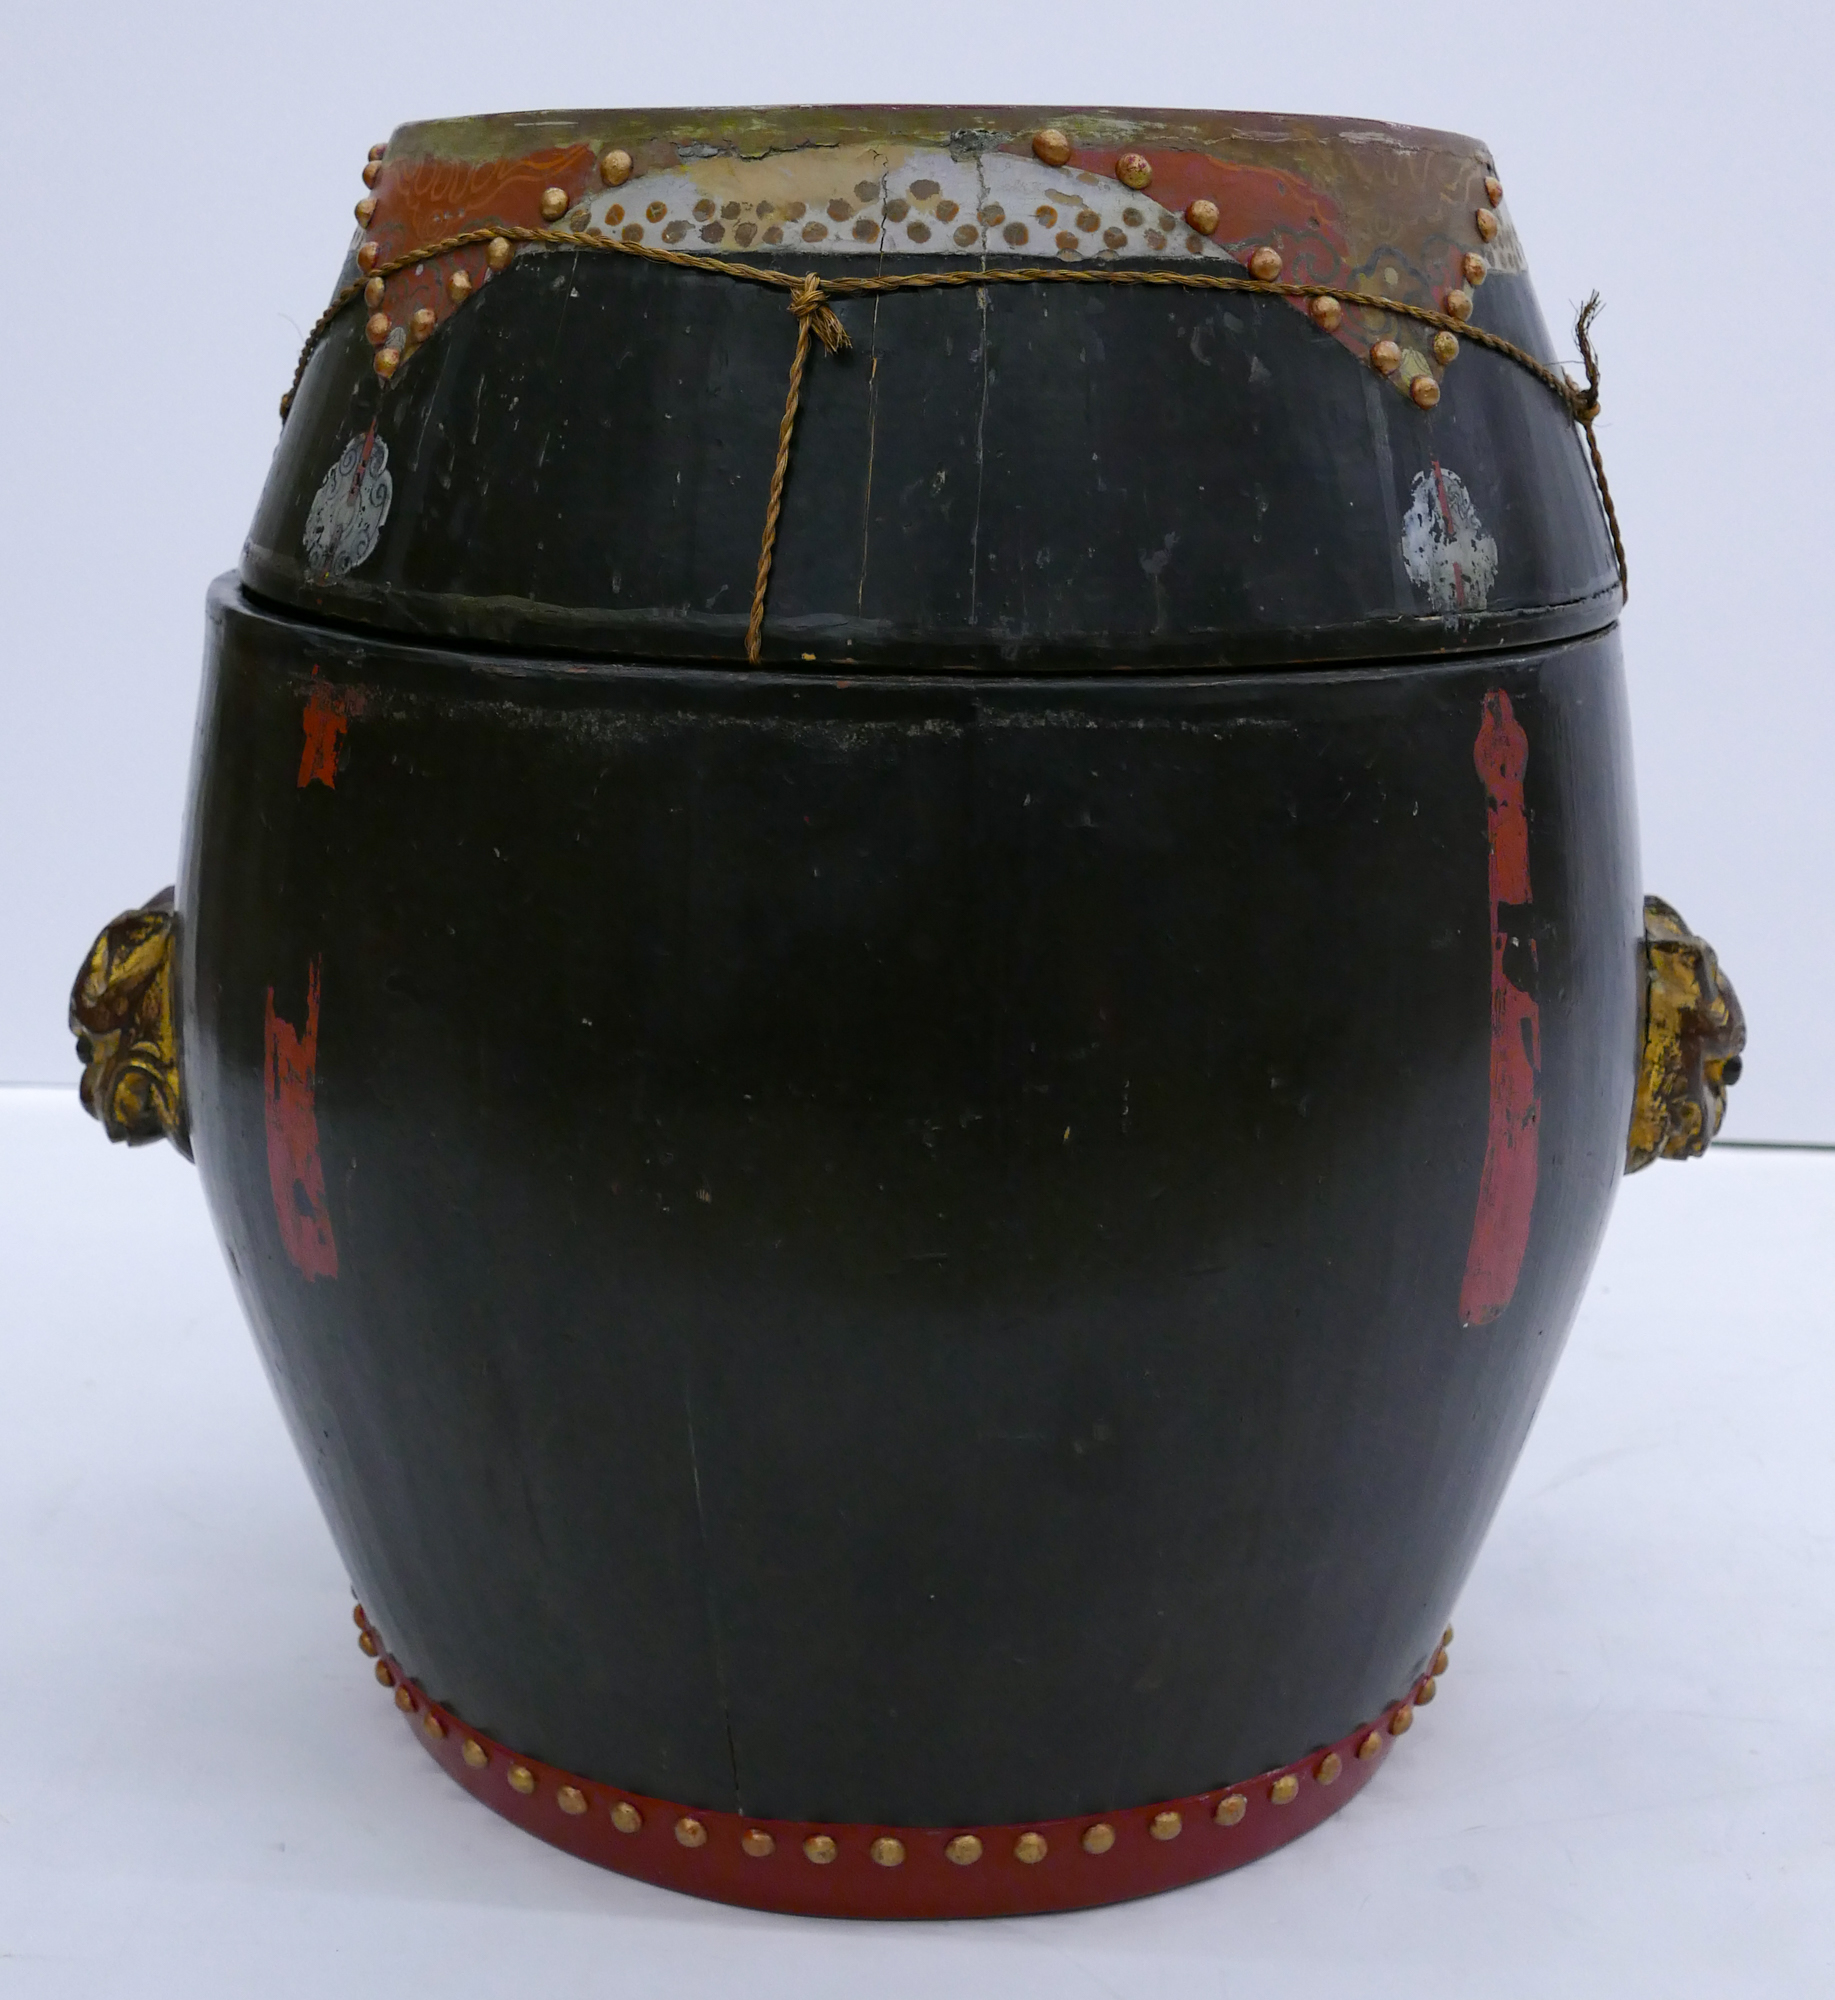 Antique Chinese Lacquered Drum 3cfb6d